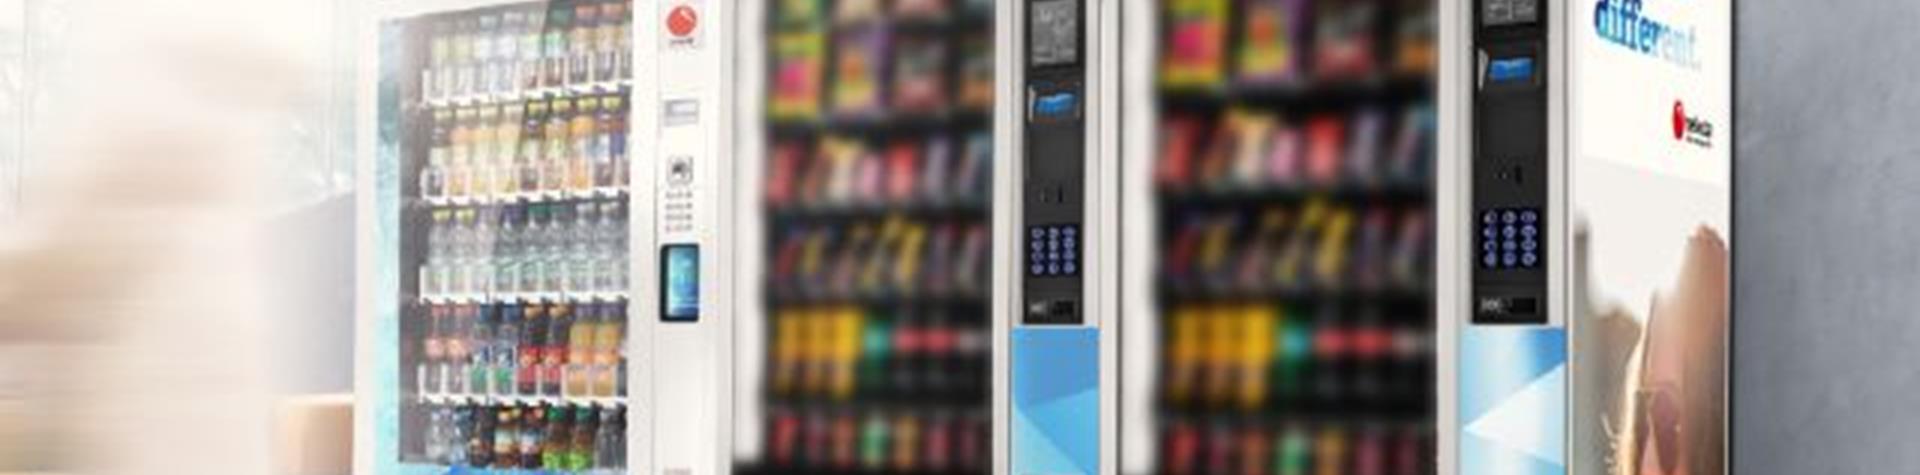 3 Selecta vending machines in an office lobby